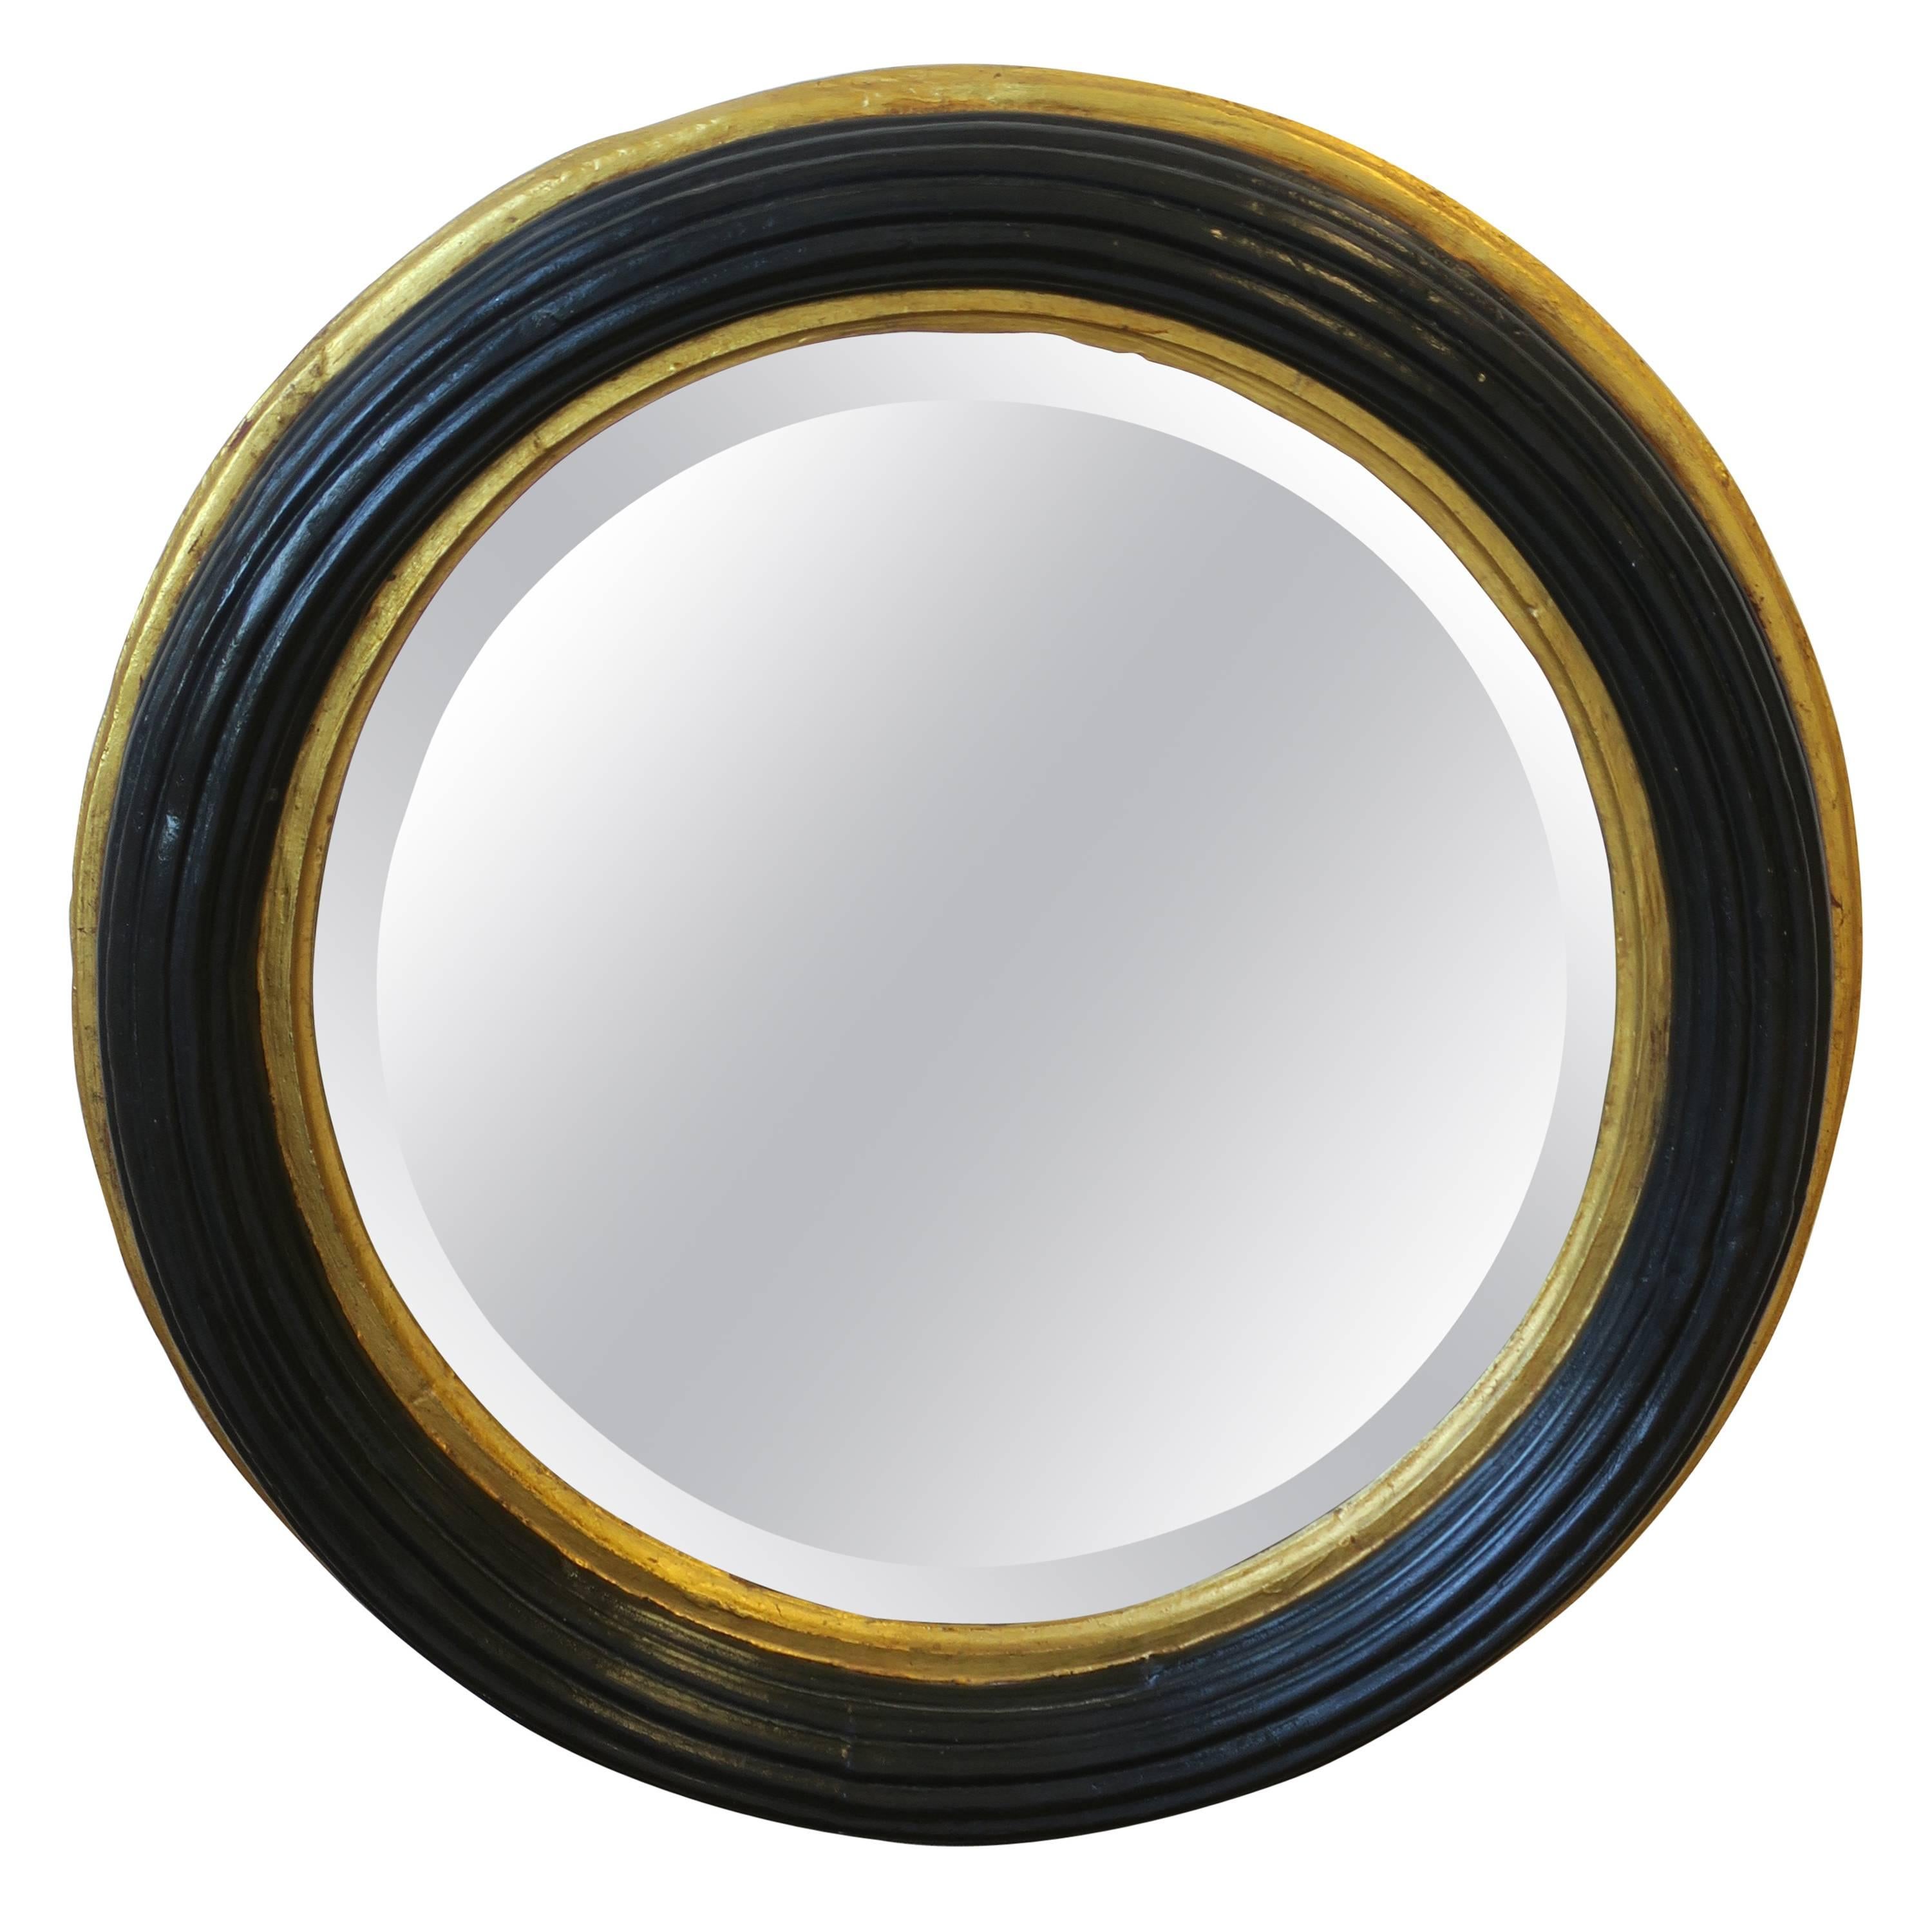 Midcentury Round Black and Gold Beveled Wall Mirror